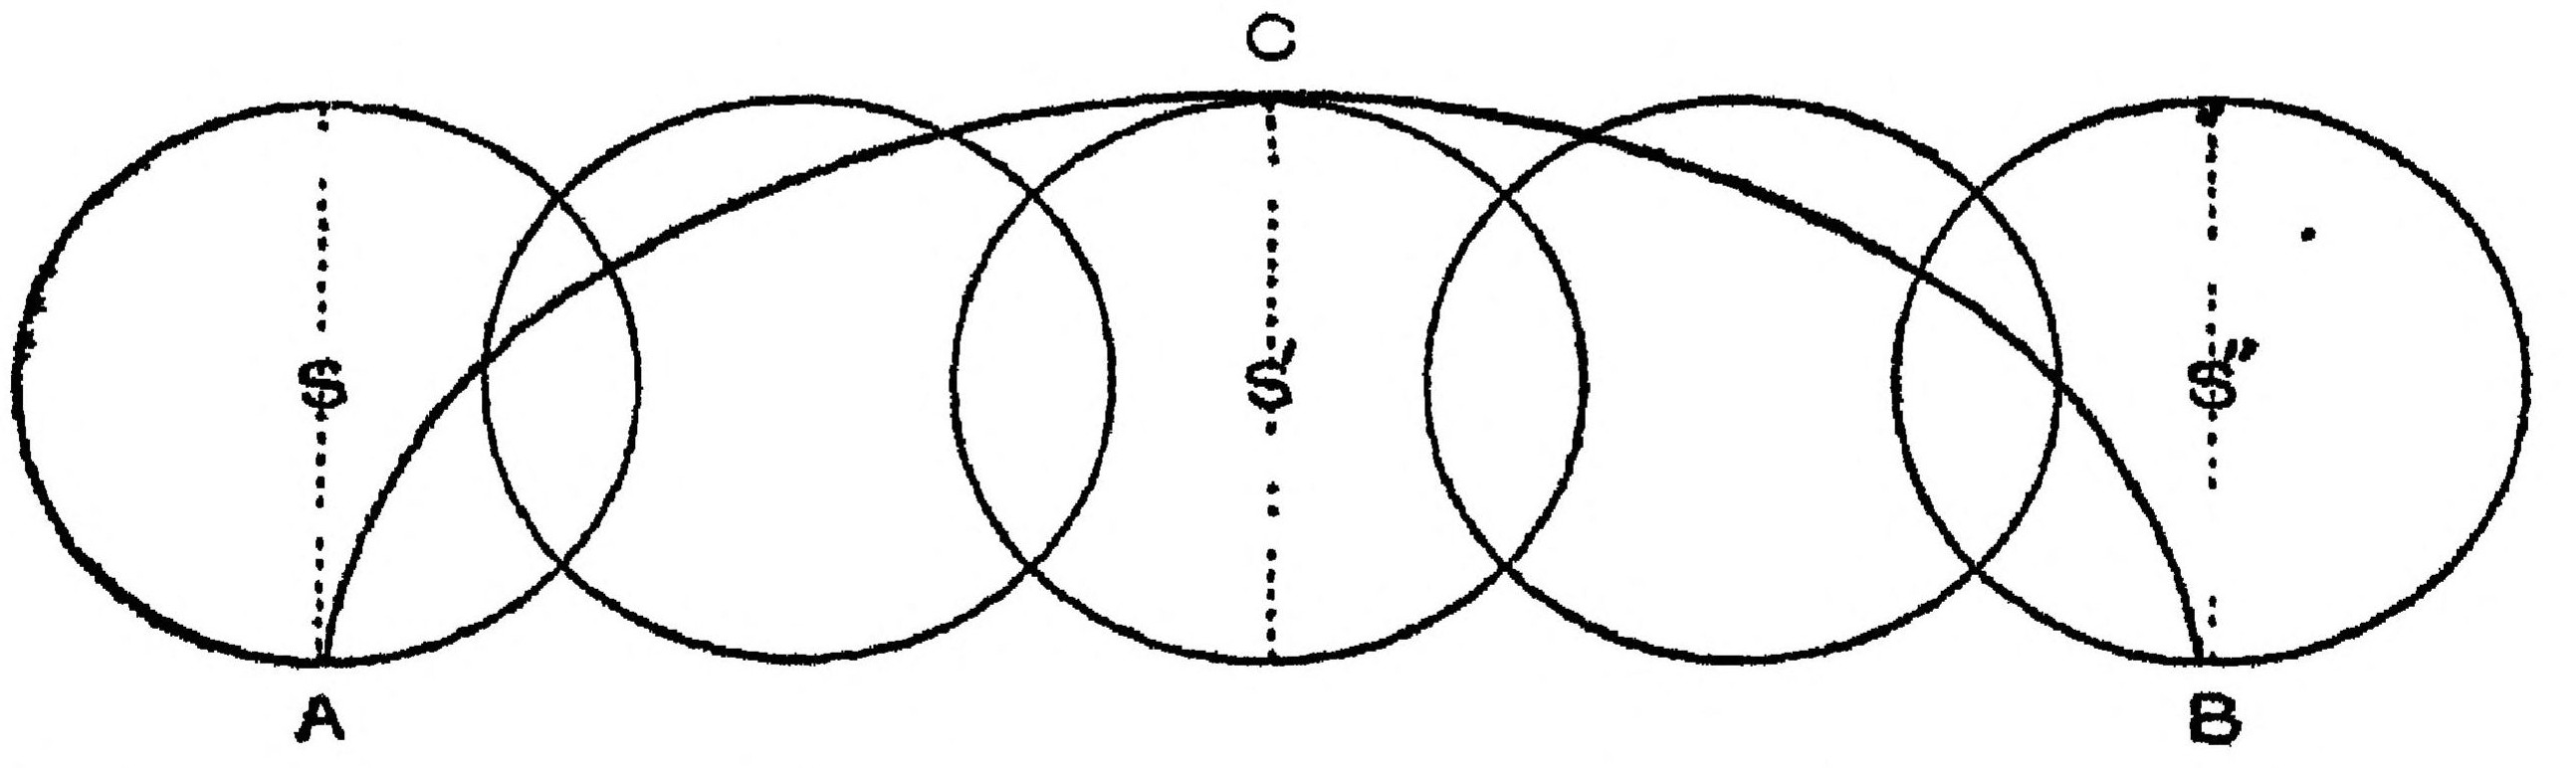 Figure 4. Diagram showing the Cycloidal curve of a planet on a vector S´-C, where A, C, B are the tropics. Then the straight line S-S´´ is equal to 2(S´C) × 3·14159.